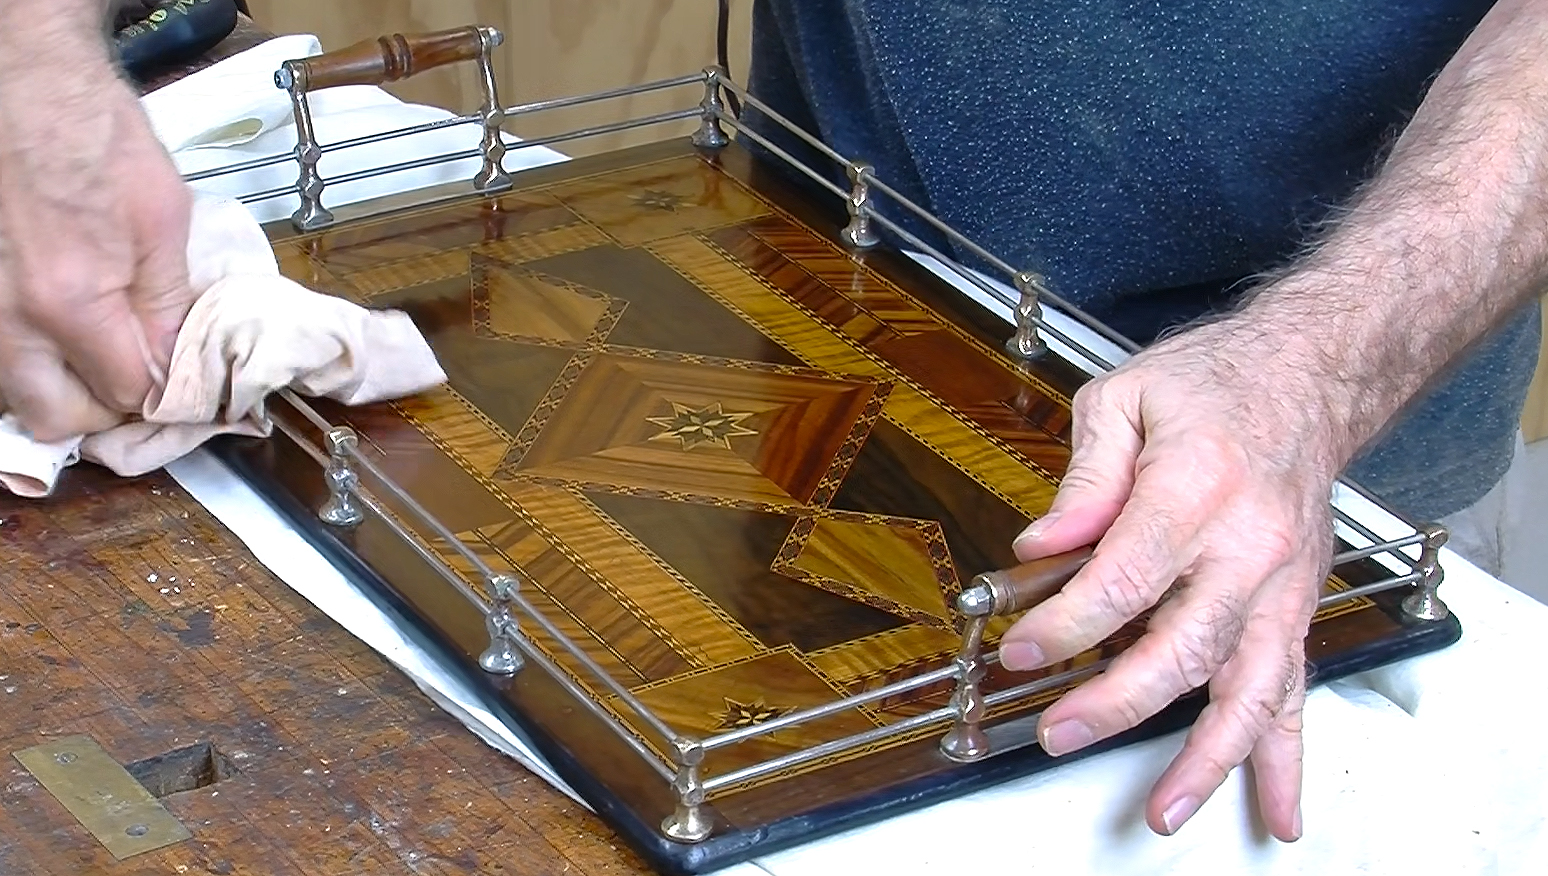 Restoration Techniques | Video tutorial – shows the restoration of an Art-Deco serving tray from start to finish. 109 mins long!